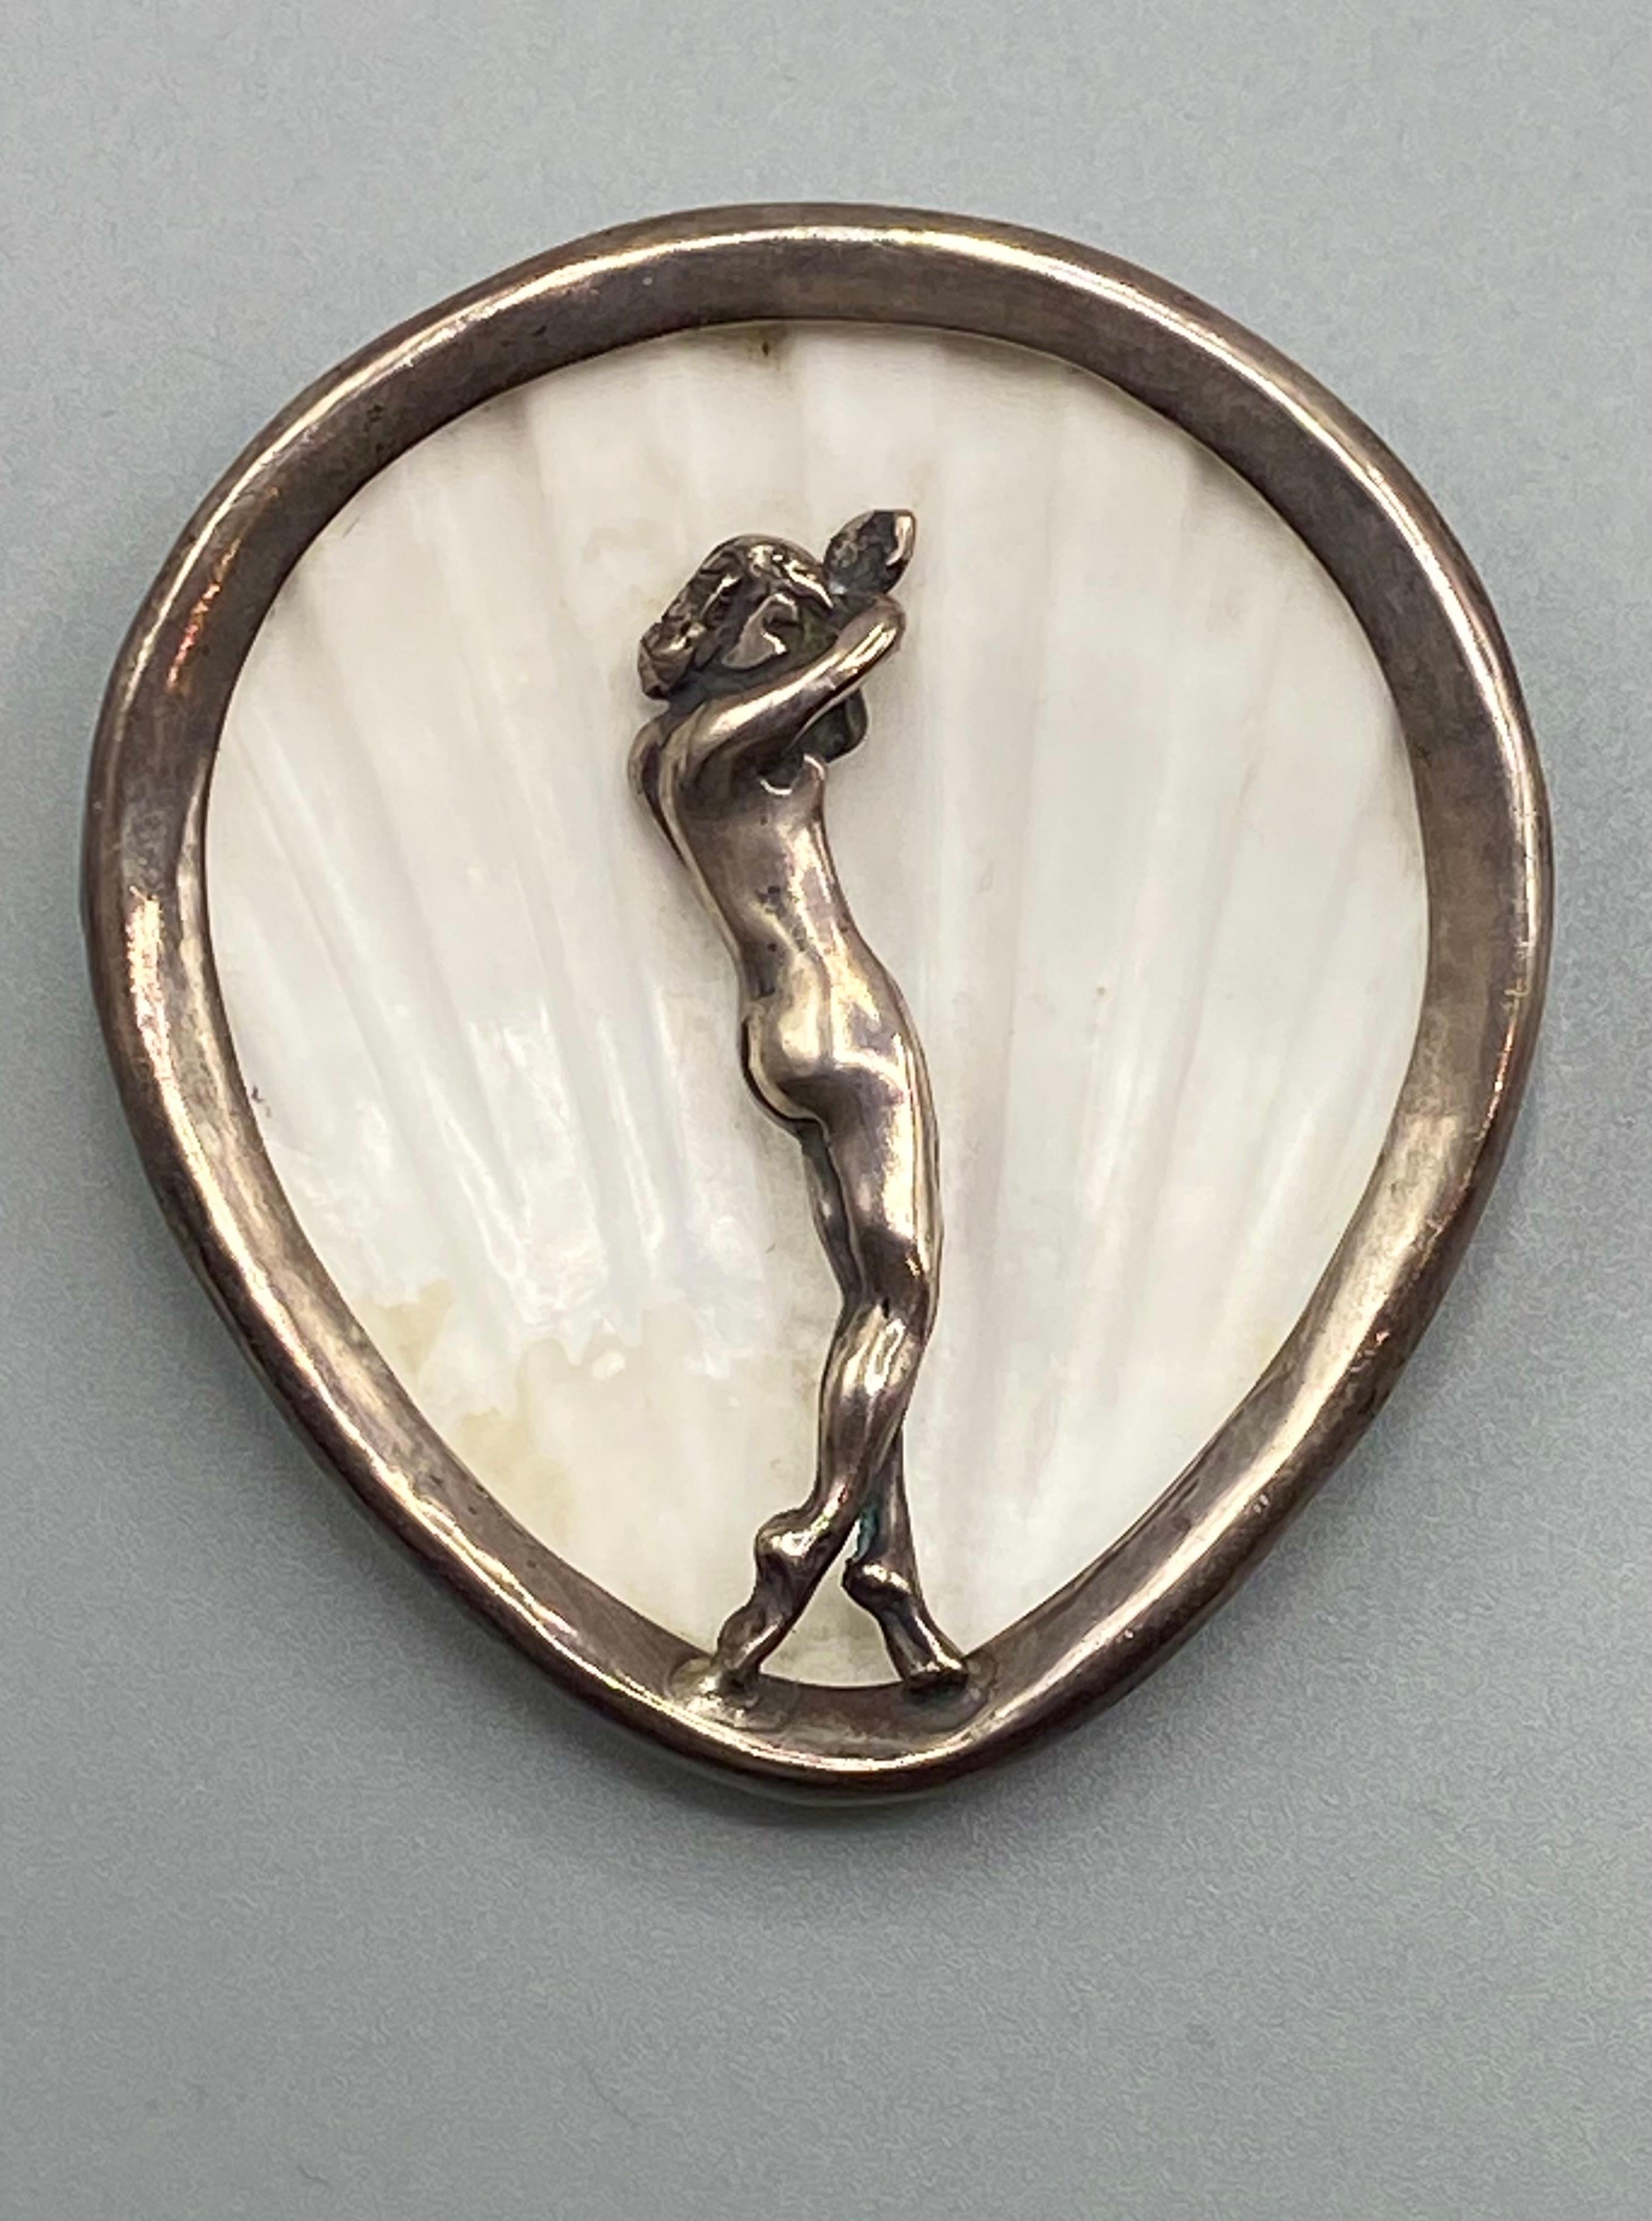 A stunning and Art Deco brooch of the Birth of the goddess Venus. It is mostly likely Italian and was purchased there. The brooch has a natural scallop shell body mounted in a matching shape hand made sterling silver frame. The concave side of the